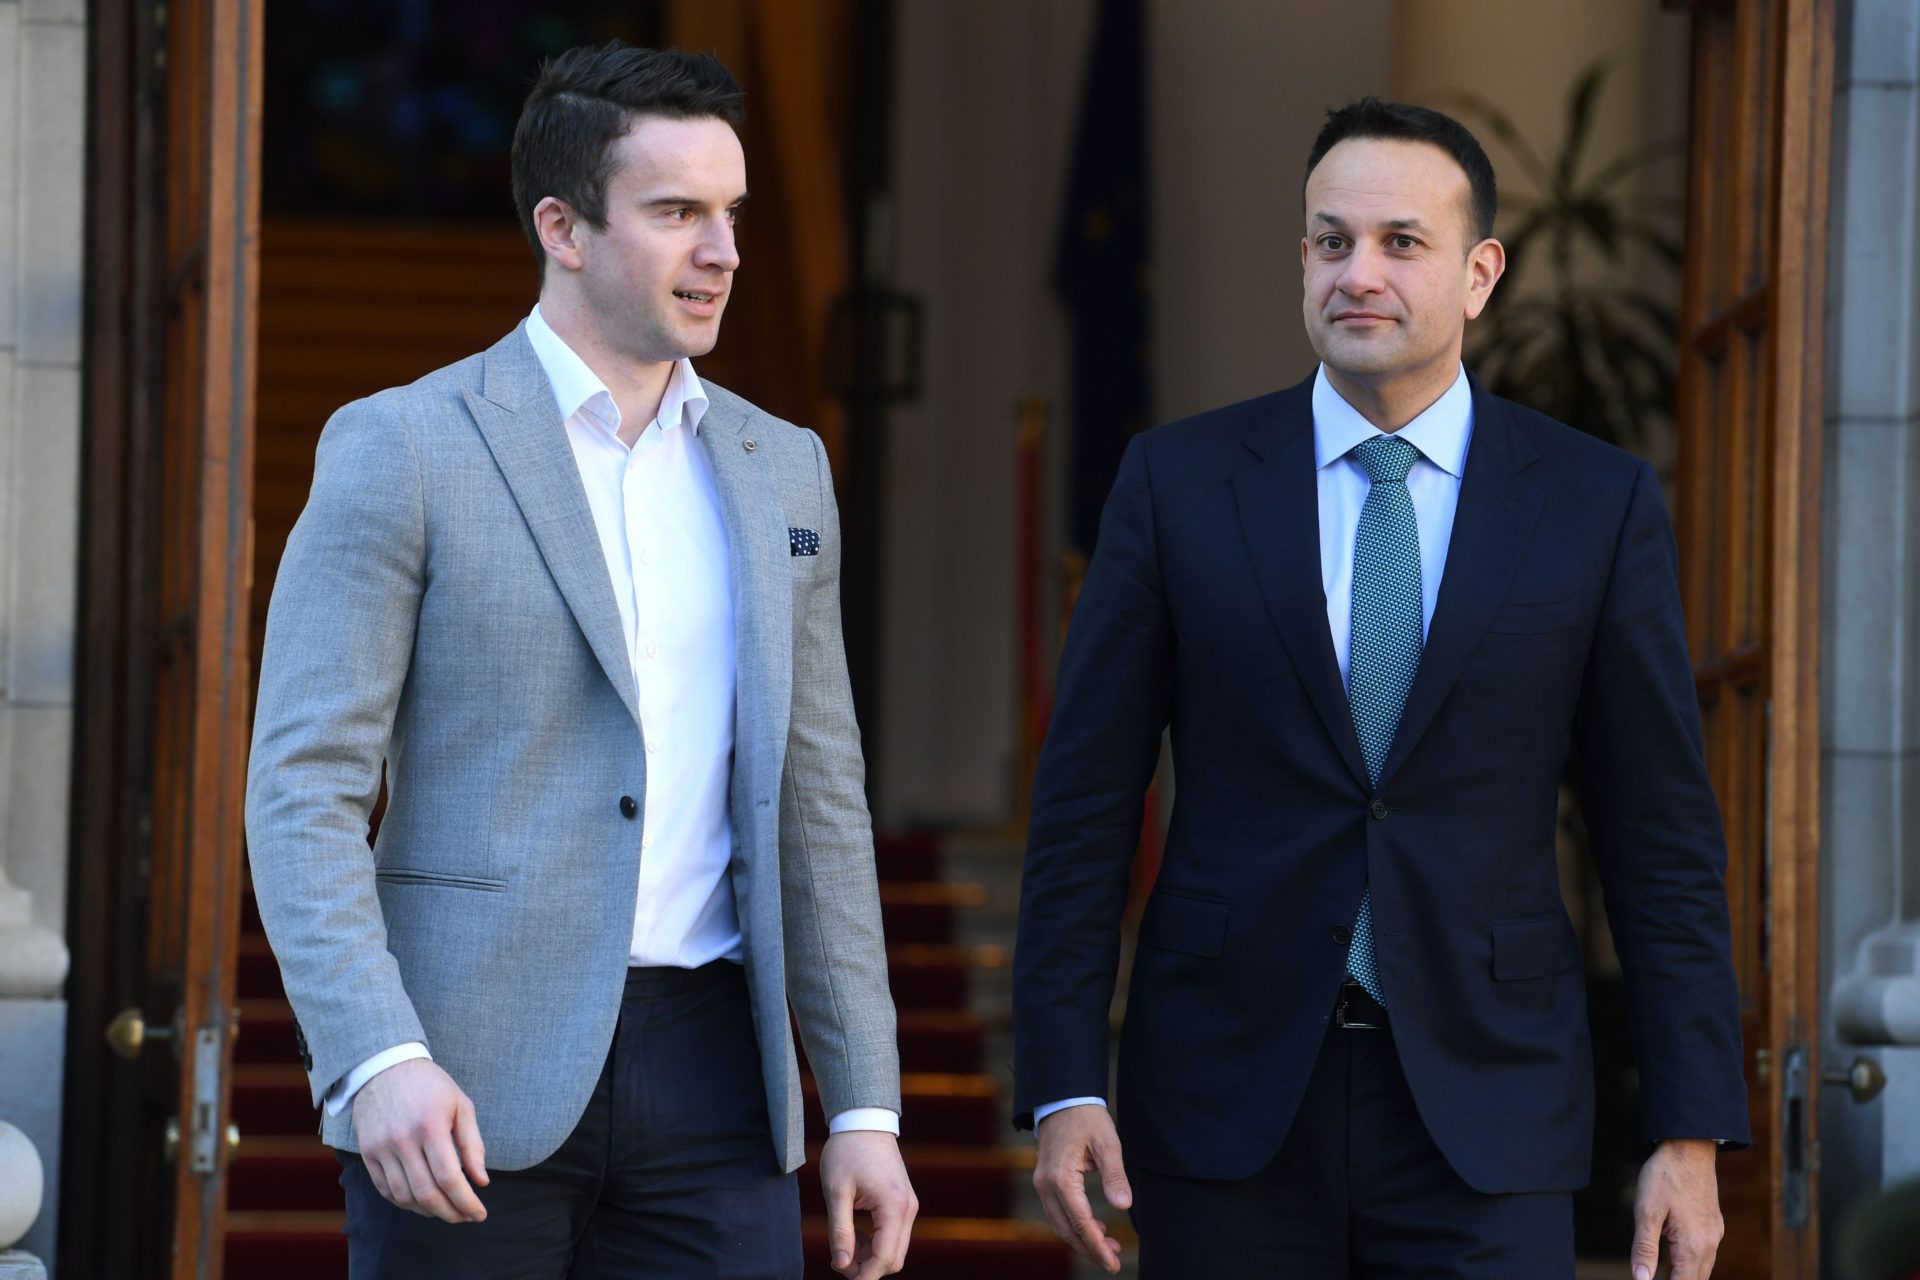 Leo Varadkar, Taoiseach of Ireland, and his partner Matt Barrett at the Government Buildings, Dublin, during their three day visit to the Republic of Ireland. Photo credit should read: Doug Peters/EMPICS